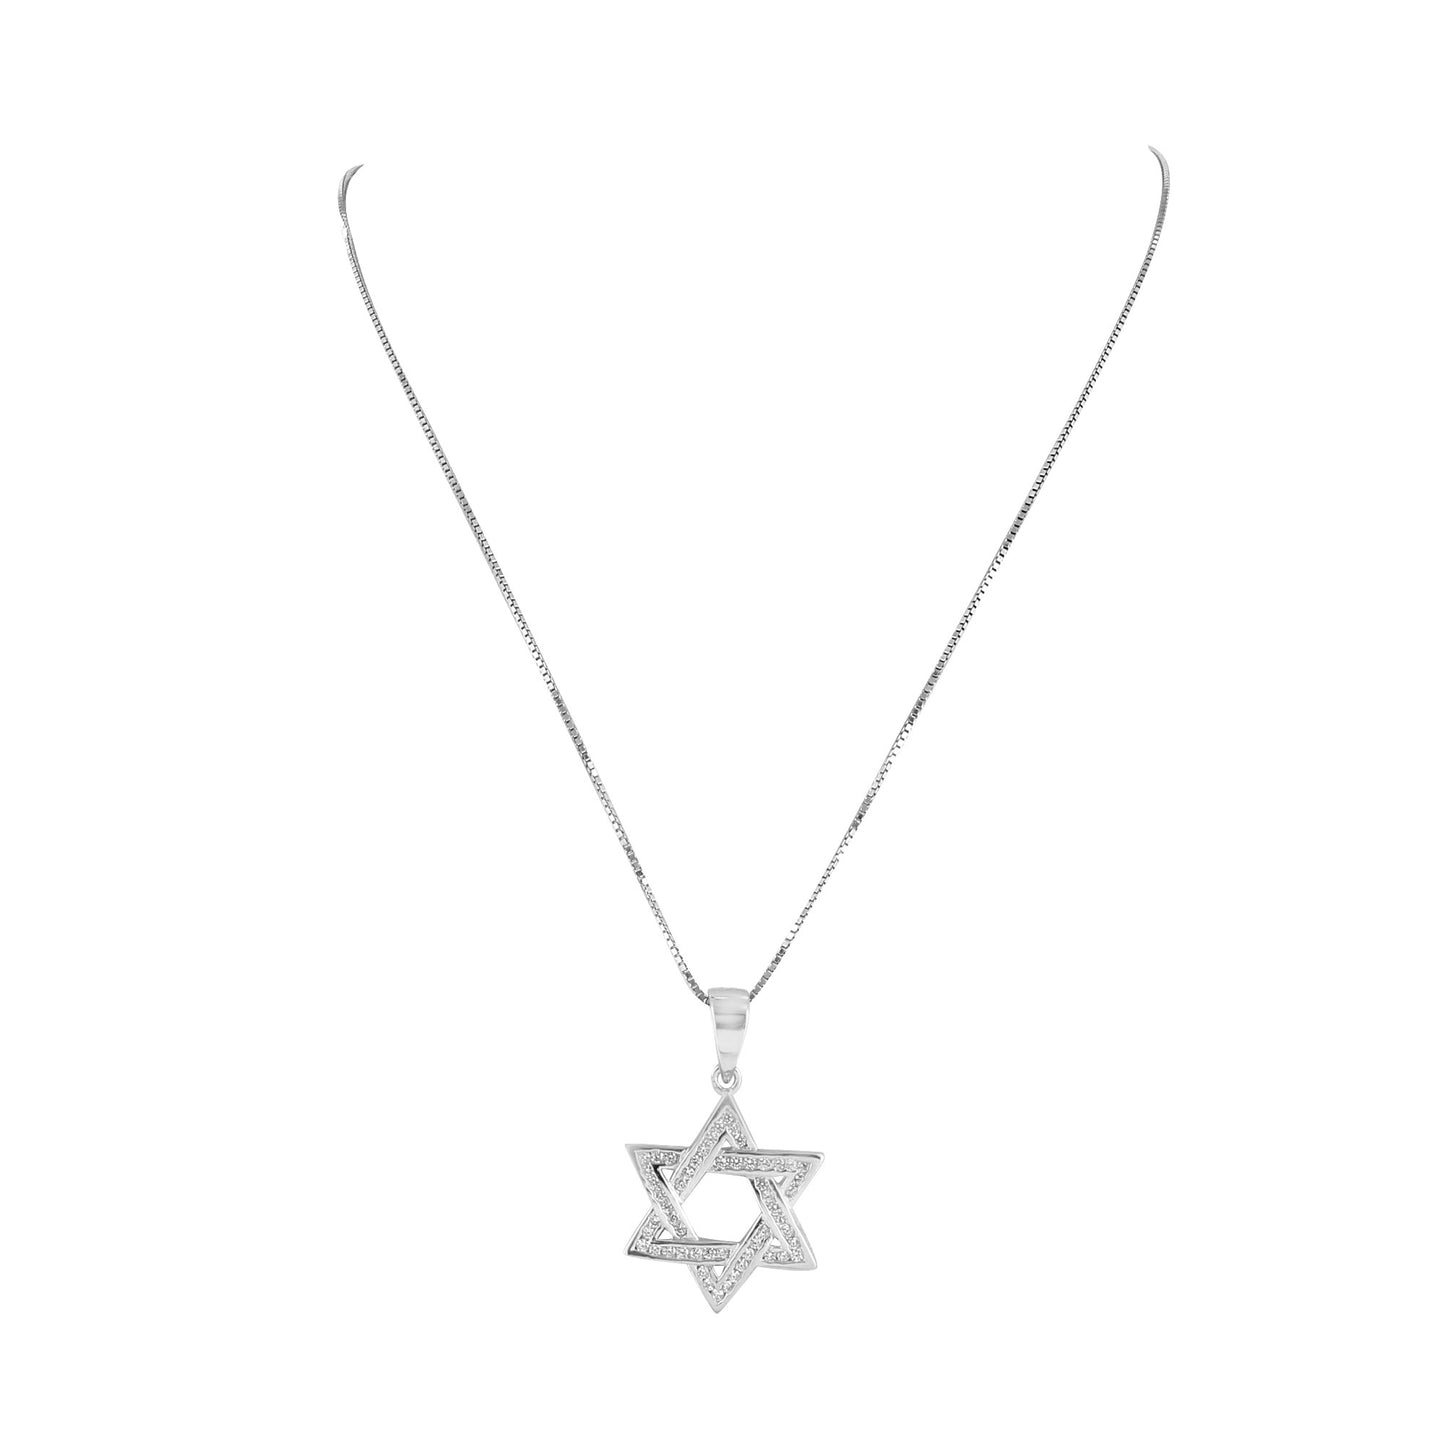 Star Of David Pendant Necklace Set Sterling Silver Chain Charm Simulated Diamond